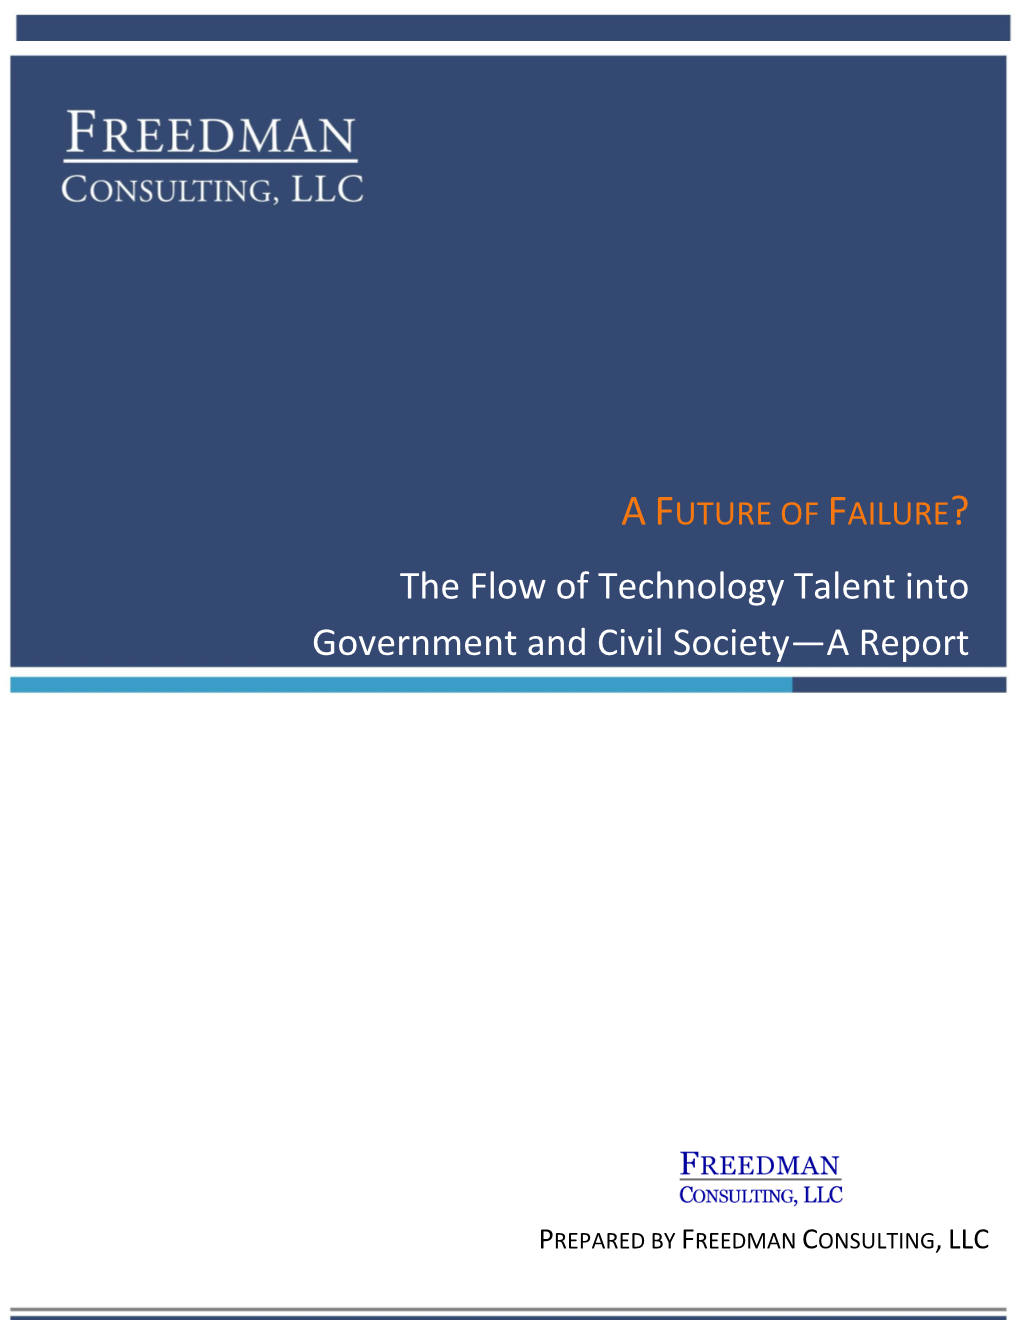 The Flow of Technology Talent Into Government and Civil Society—A Report